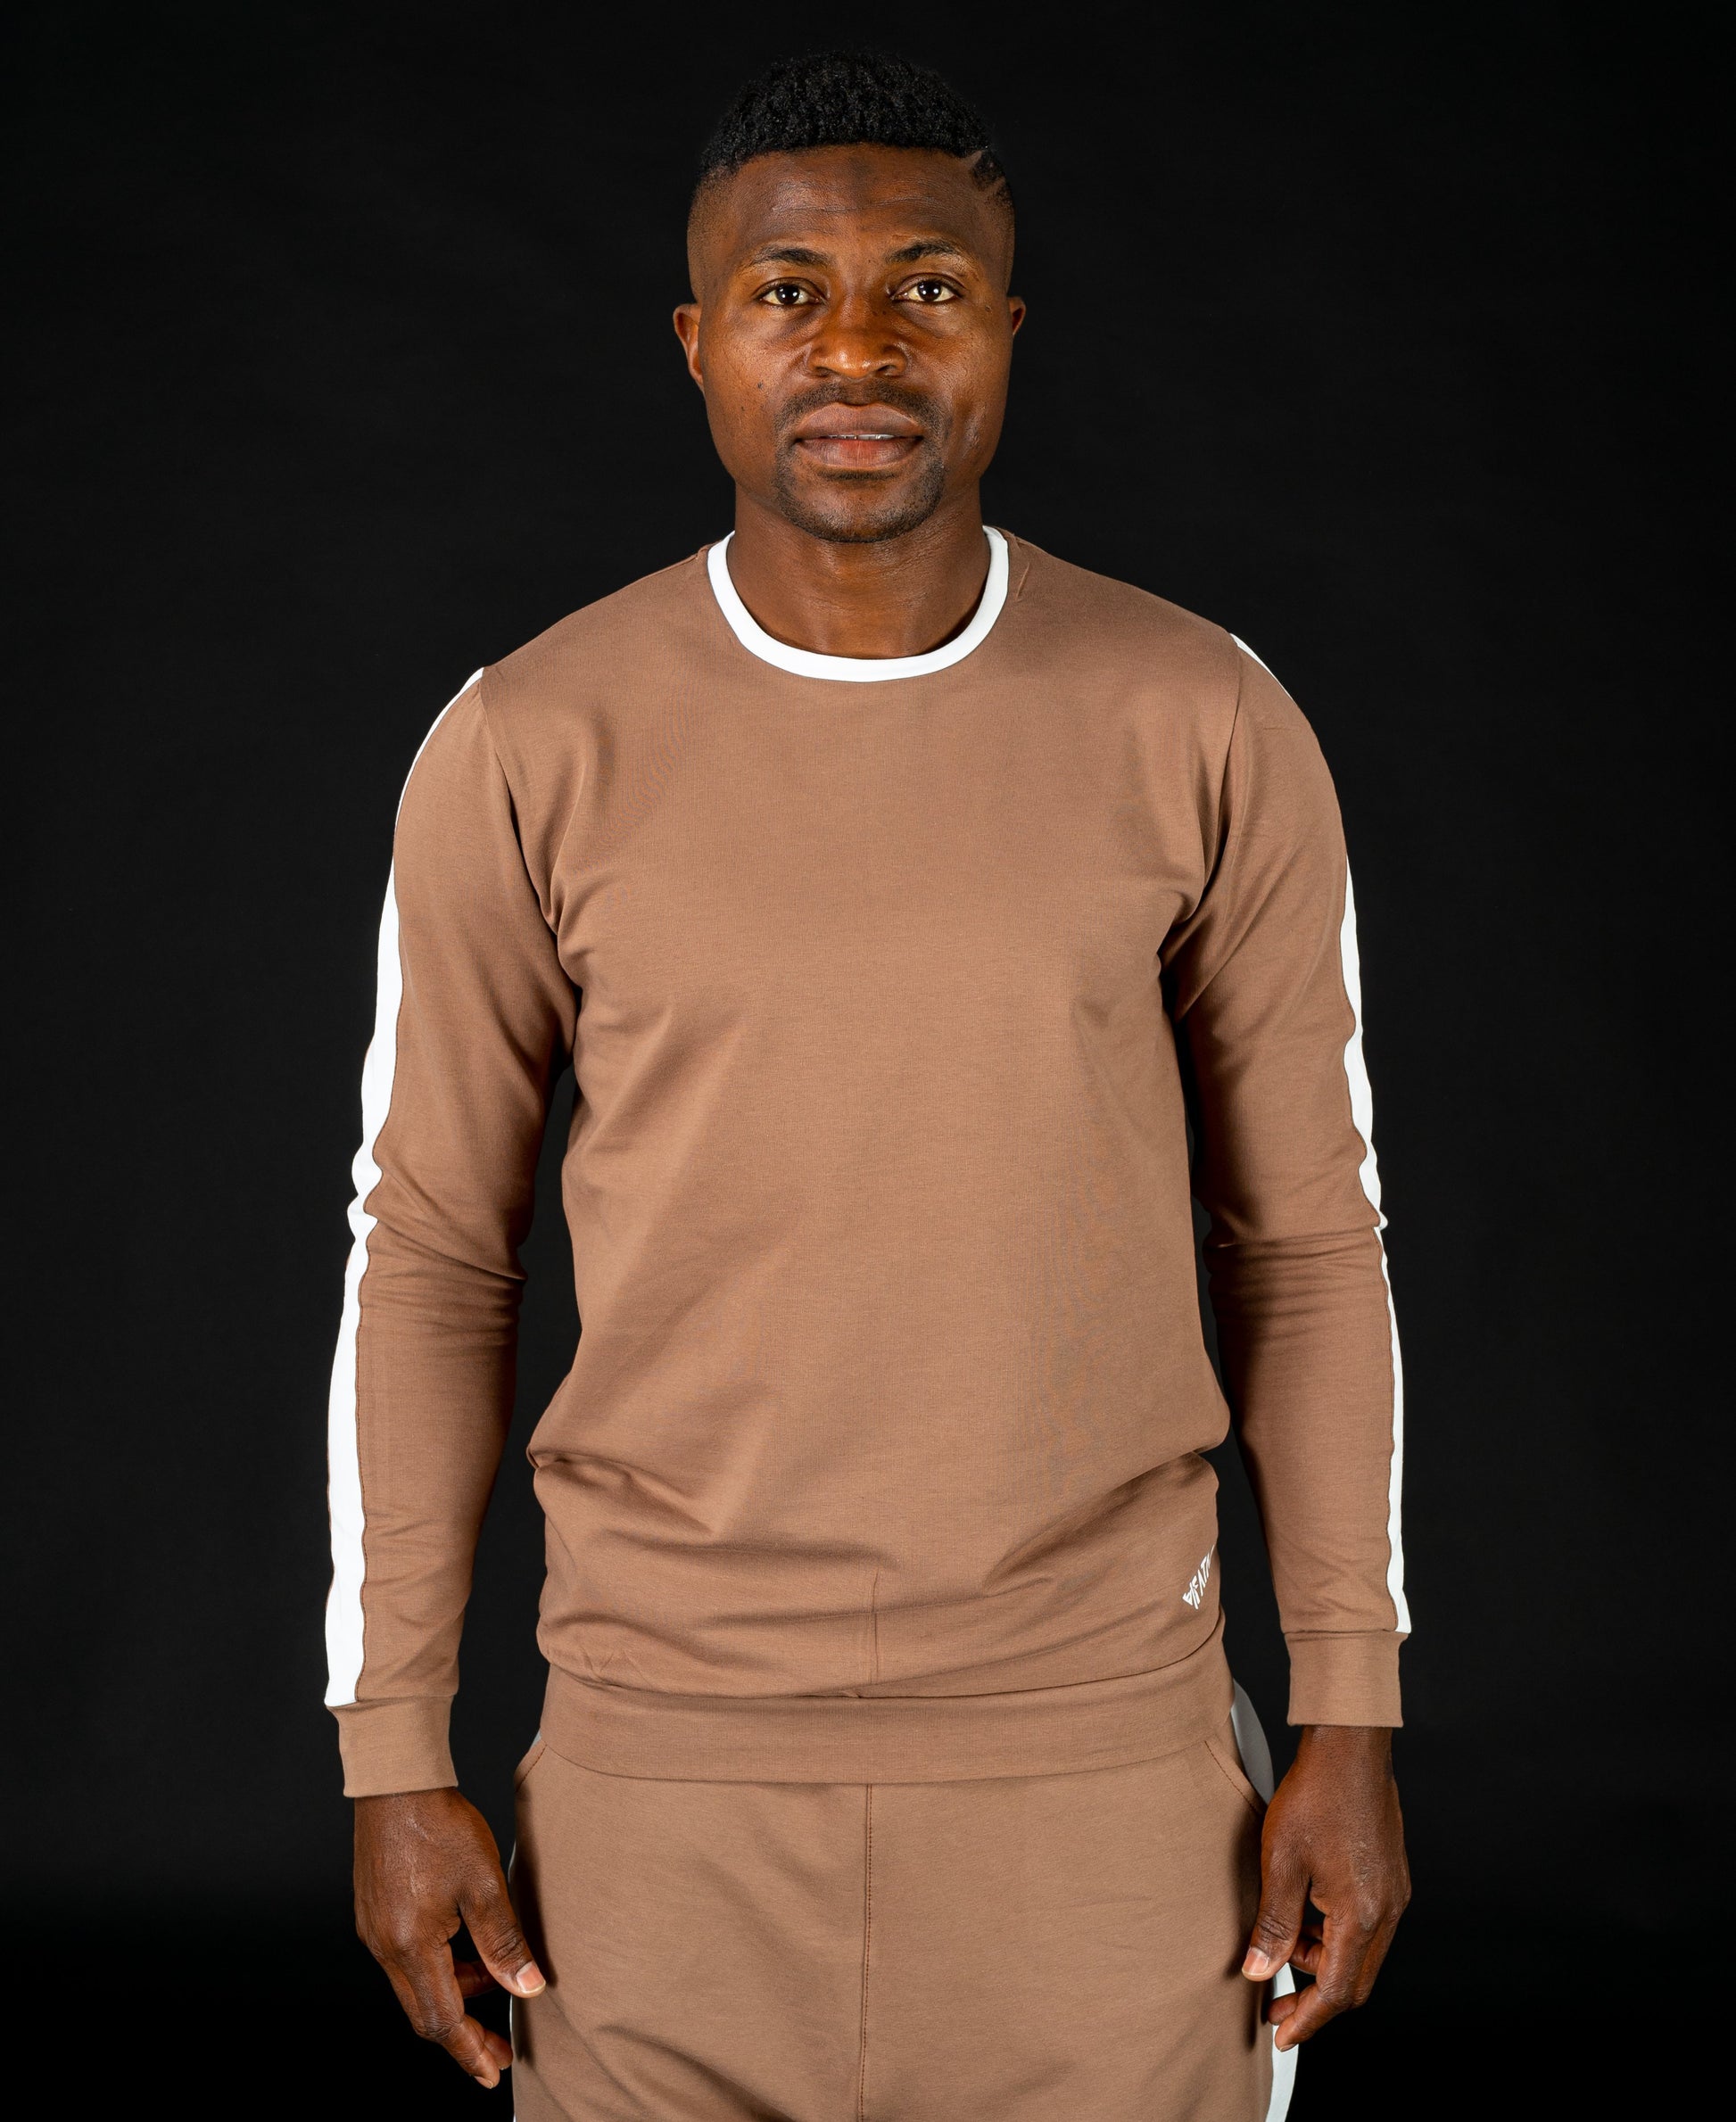 Long sleeve brown t-shirt with white line - Fatai Style